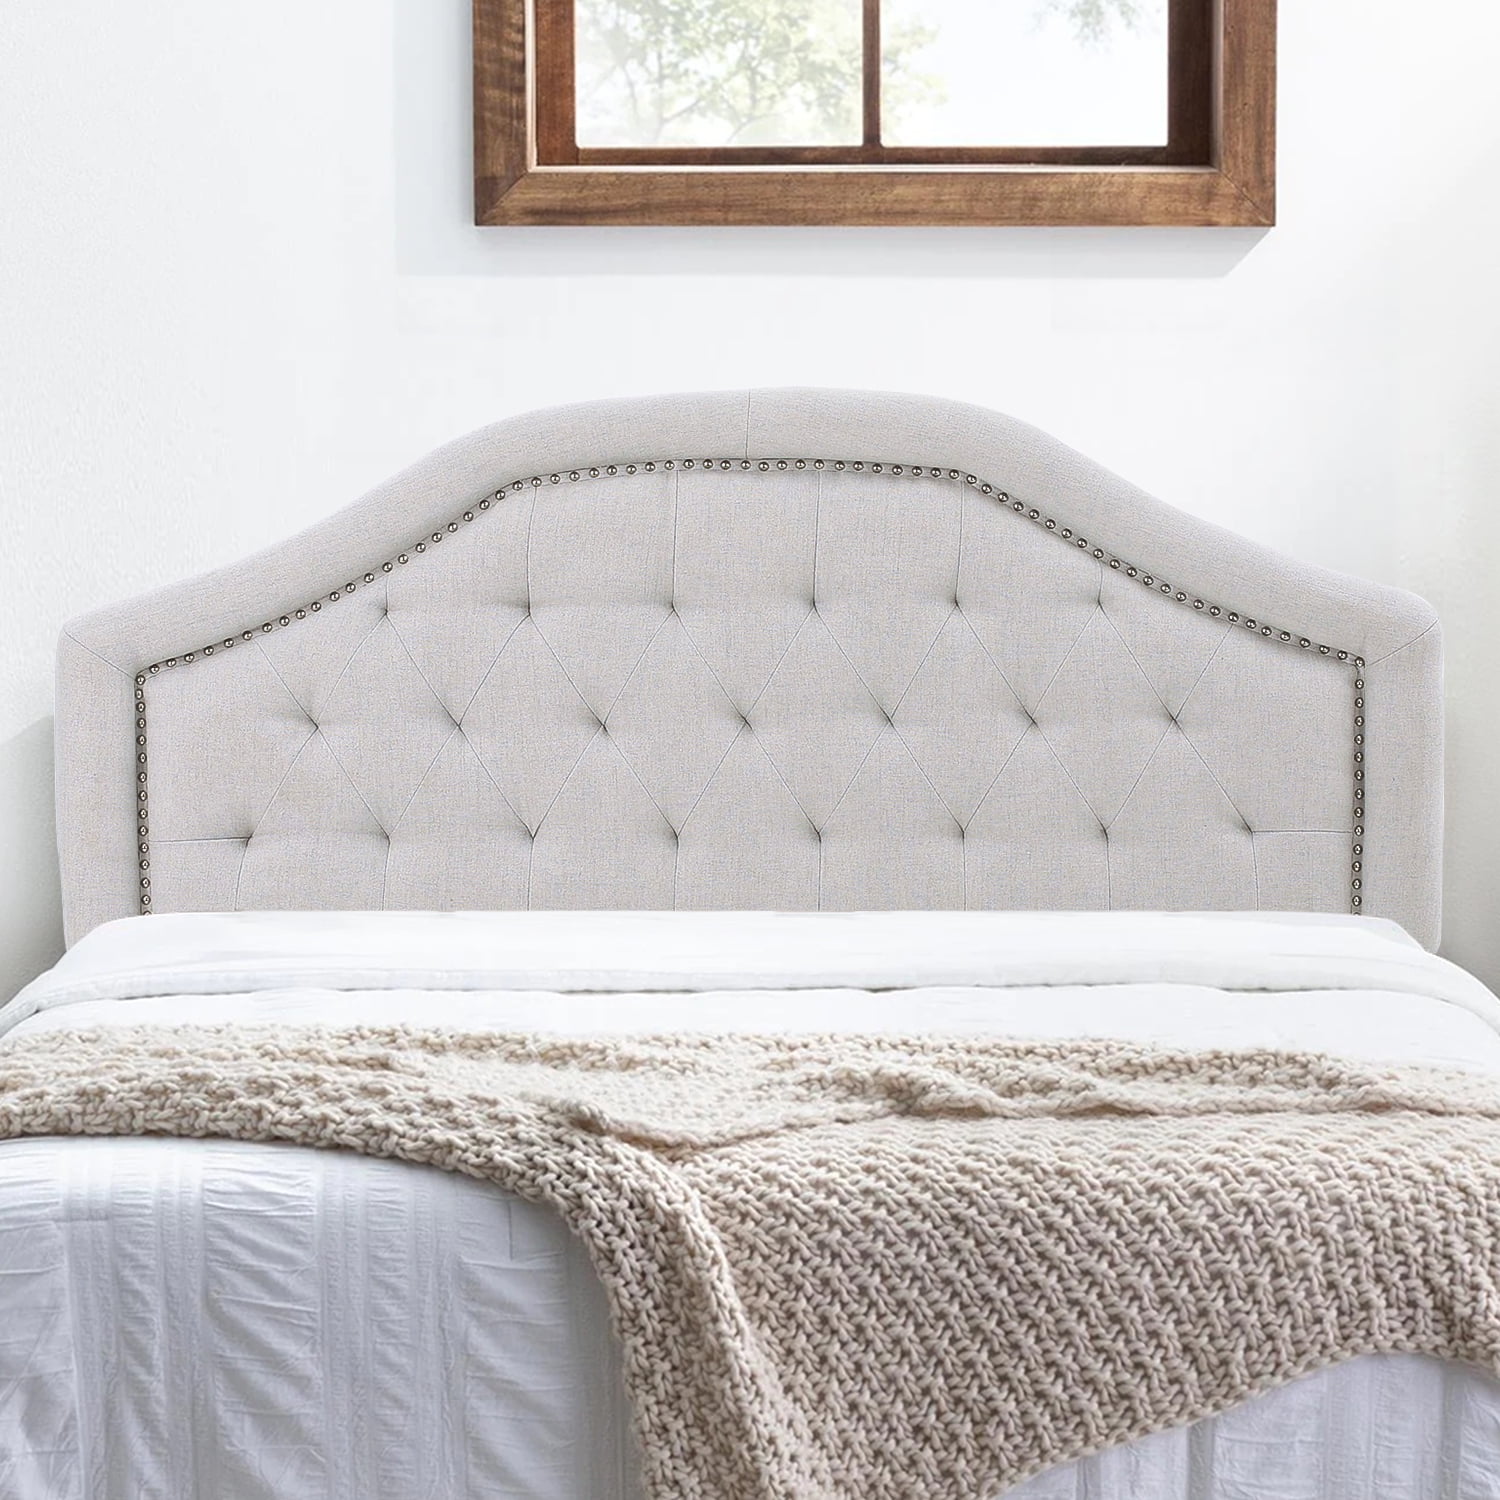 Canddidliike Upholstered Headboard for Queen/Full Size Bed, Linen Tufted Gray Headboard